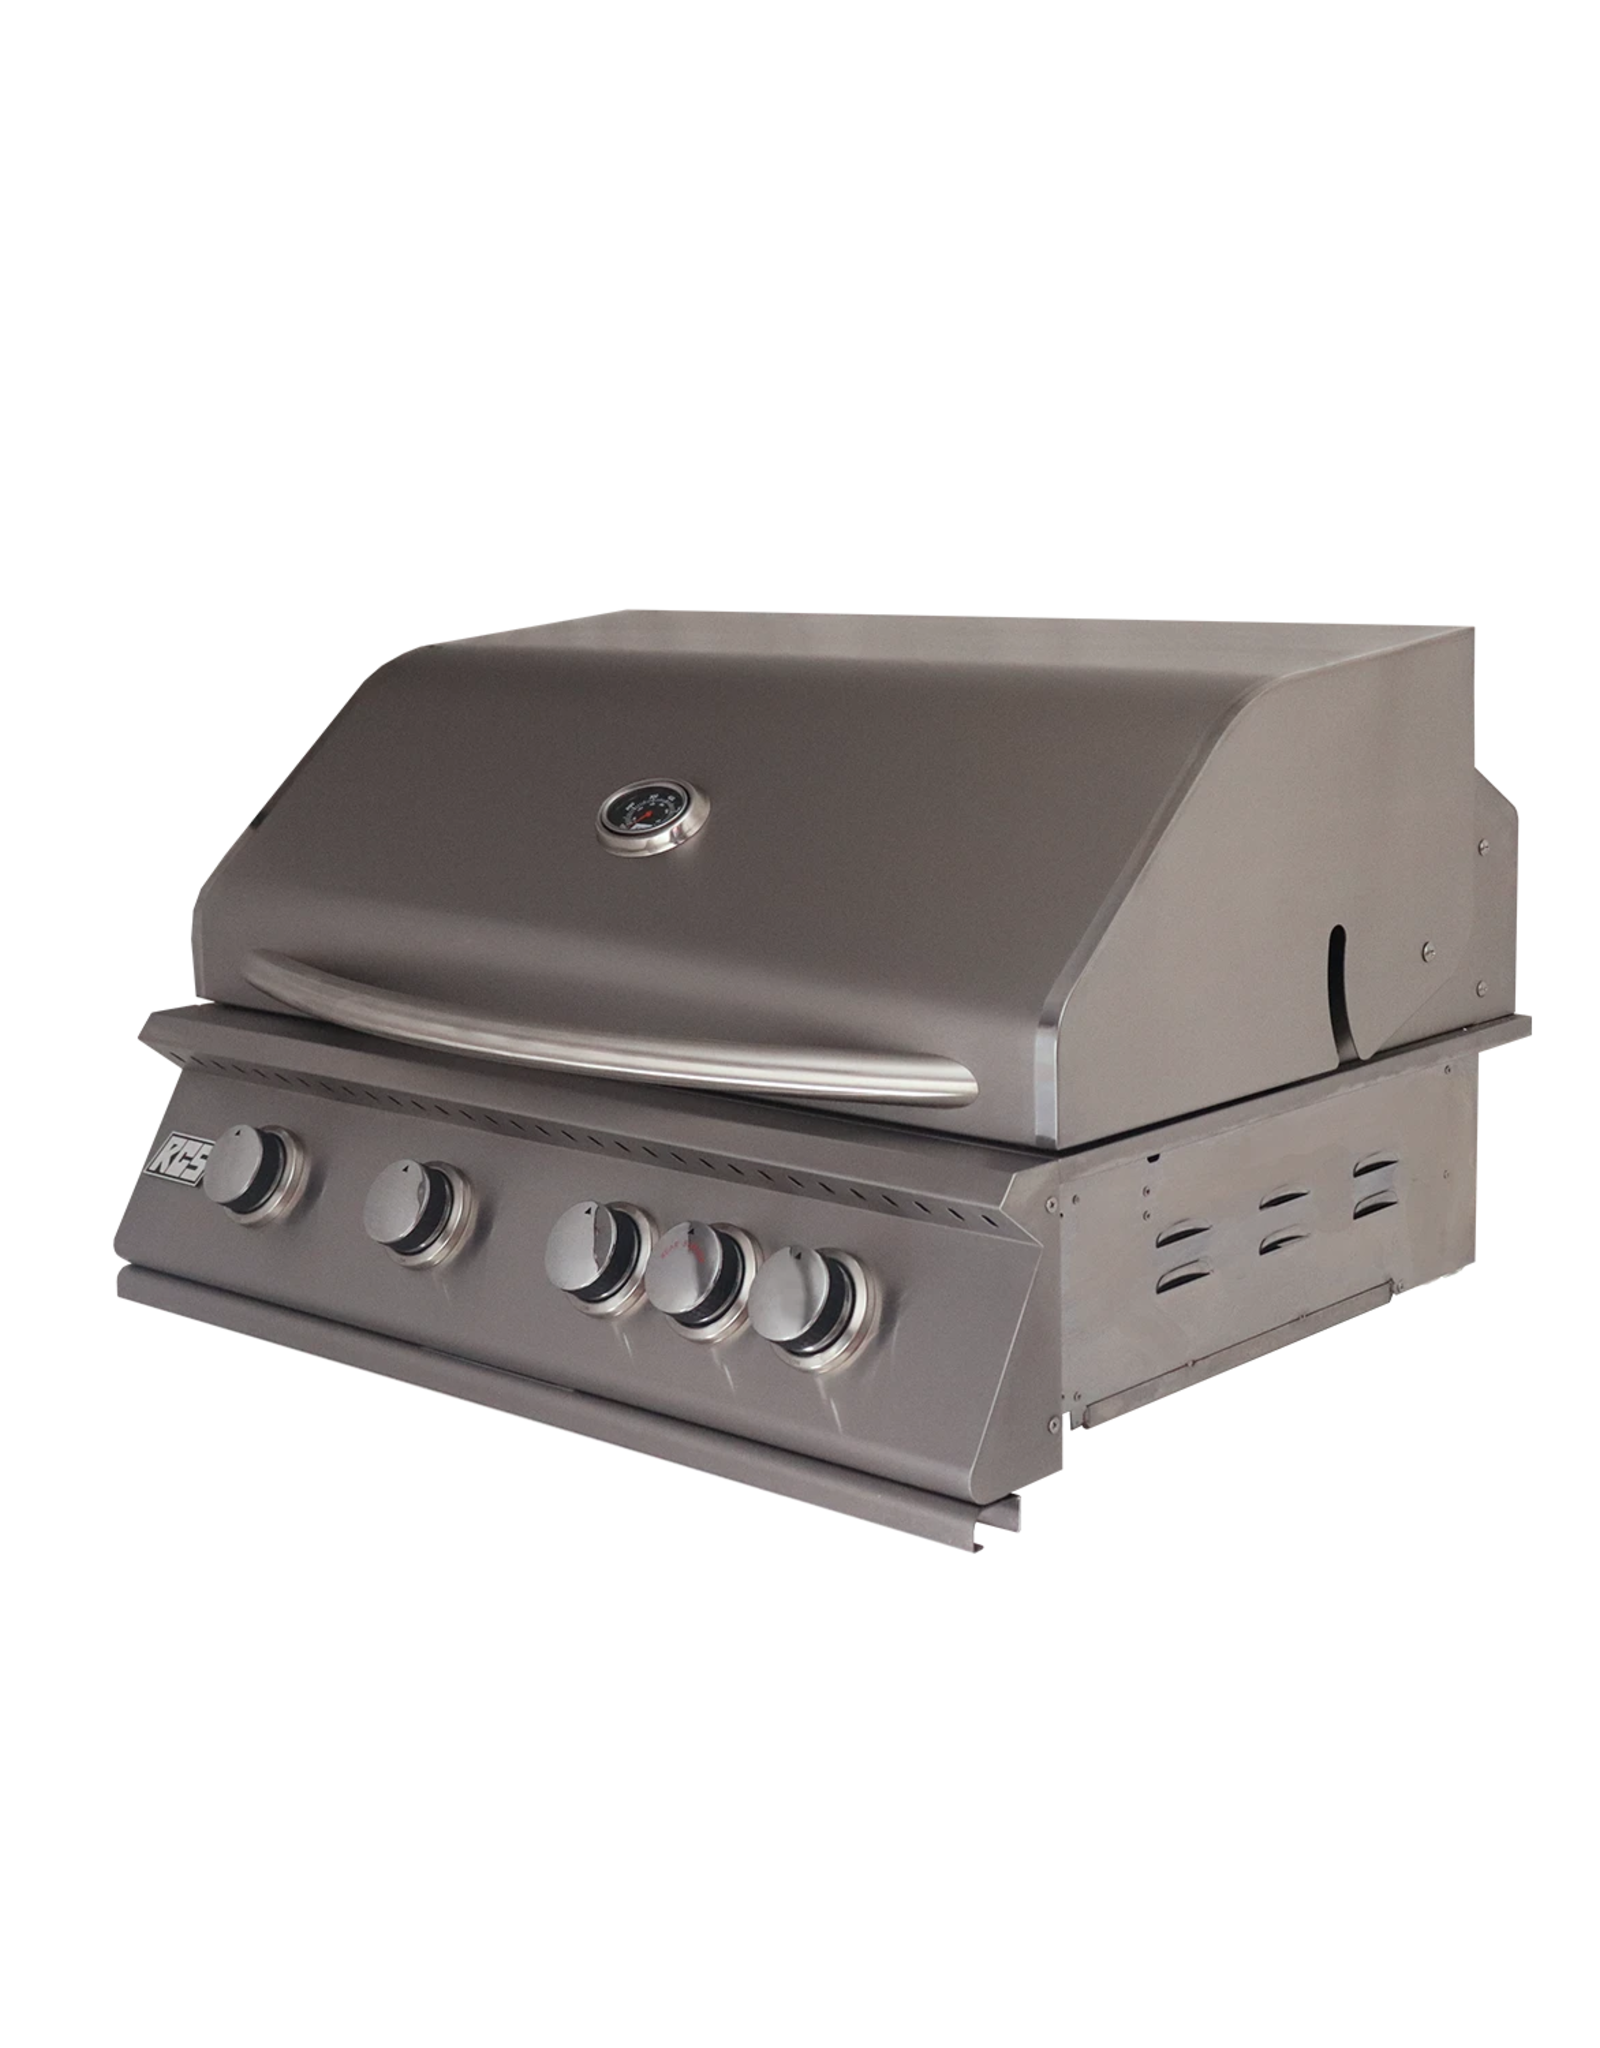 Renaissance Cooking Systems Renaissance Cooking Systems 32" Premier Drop-In Grill - RJC32A